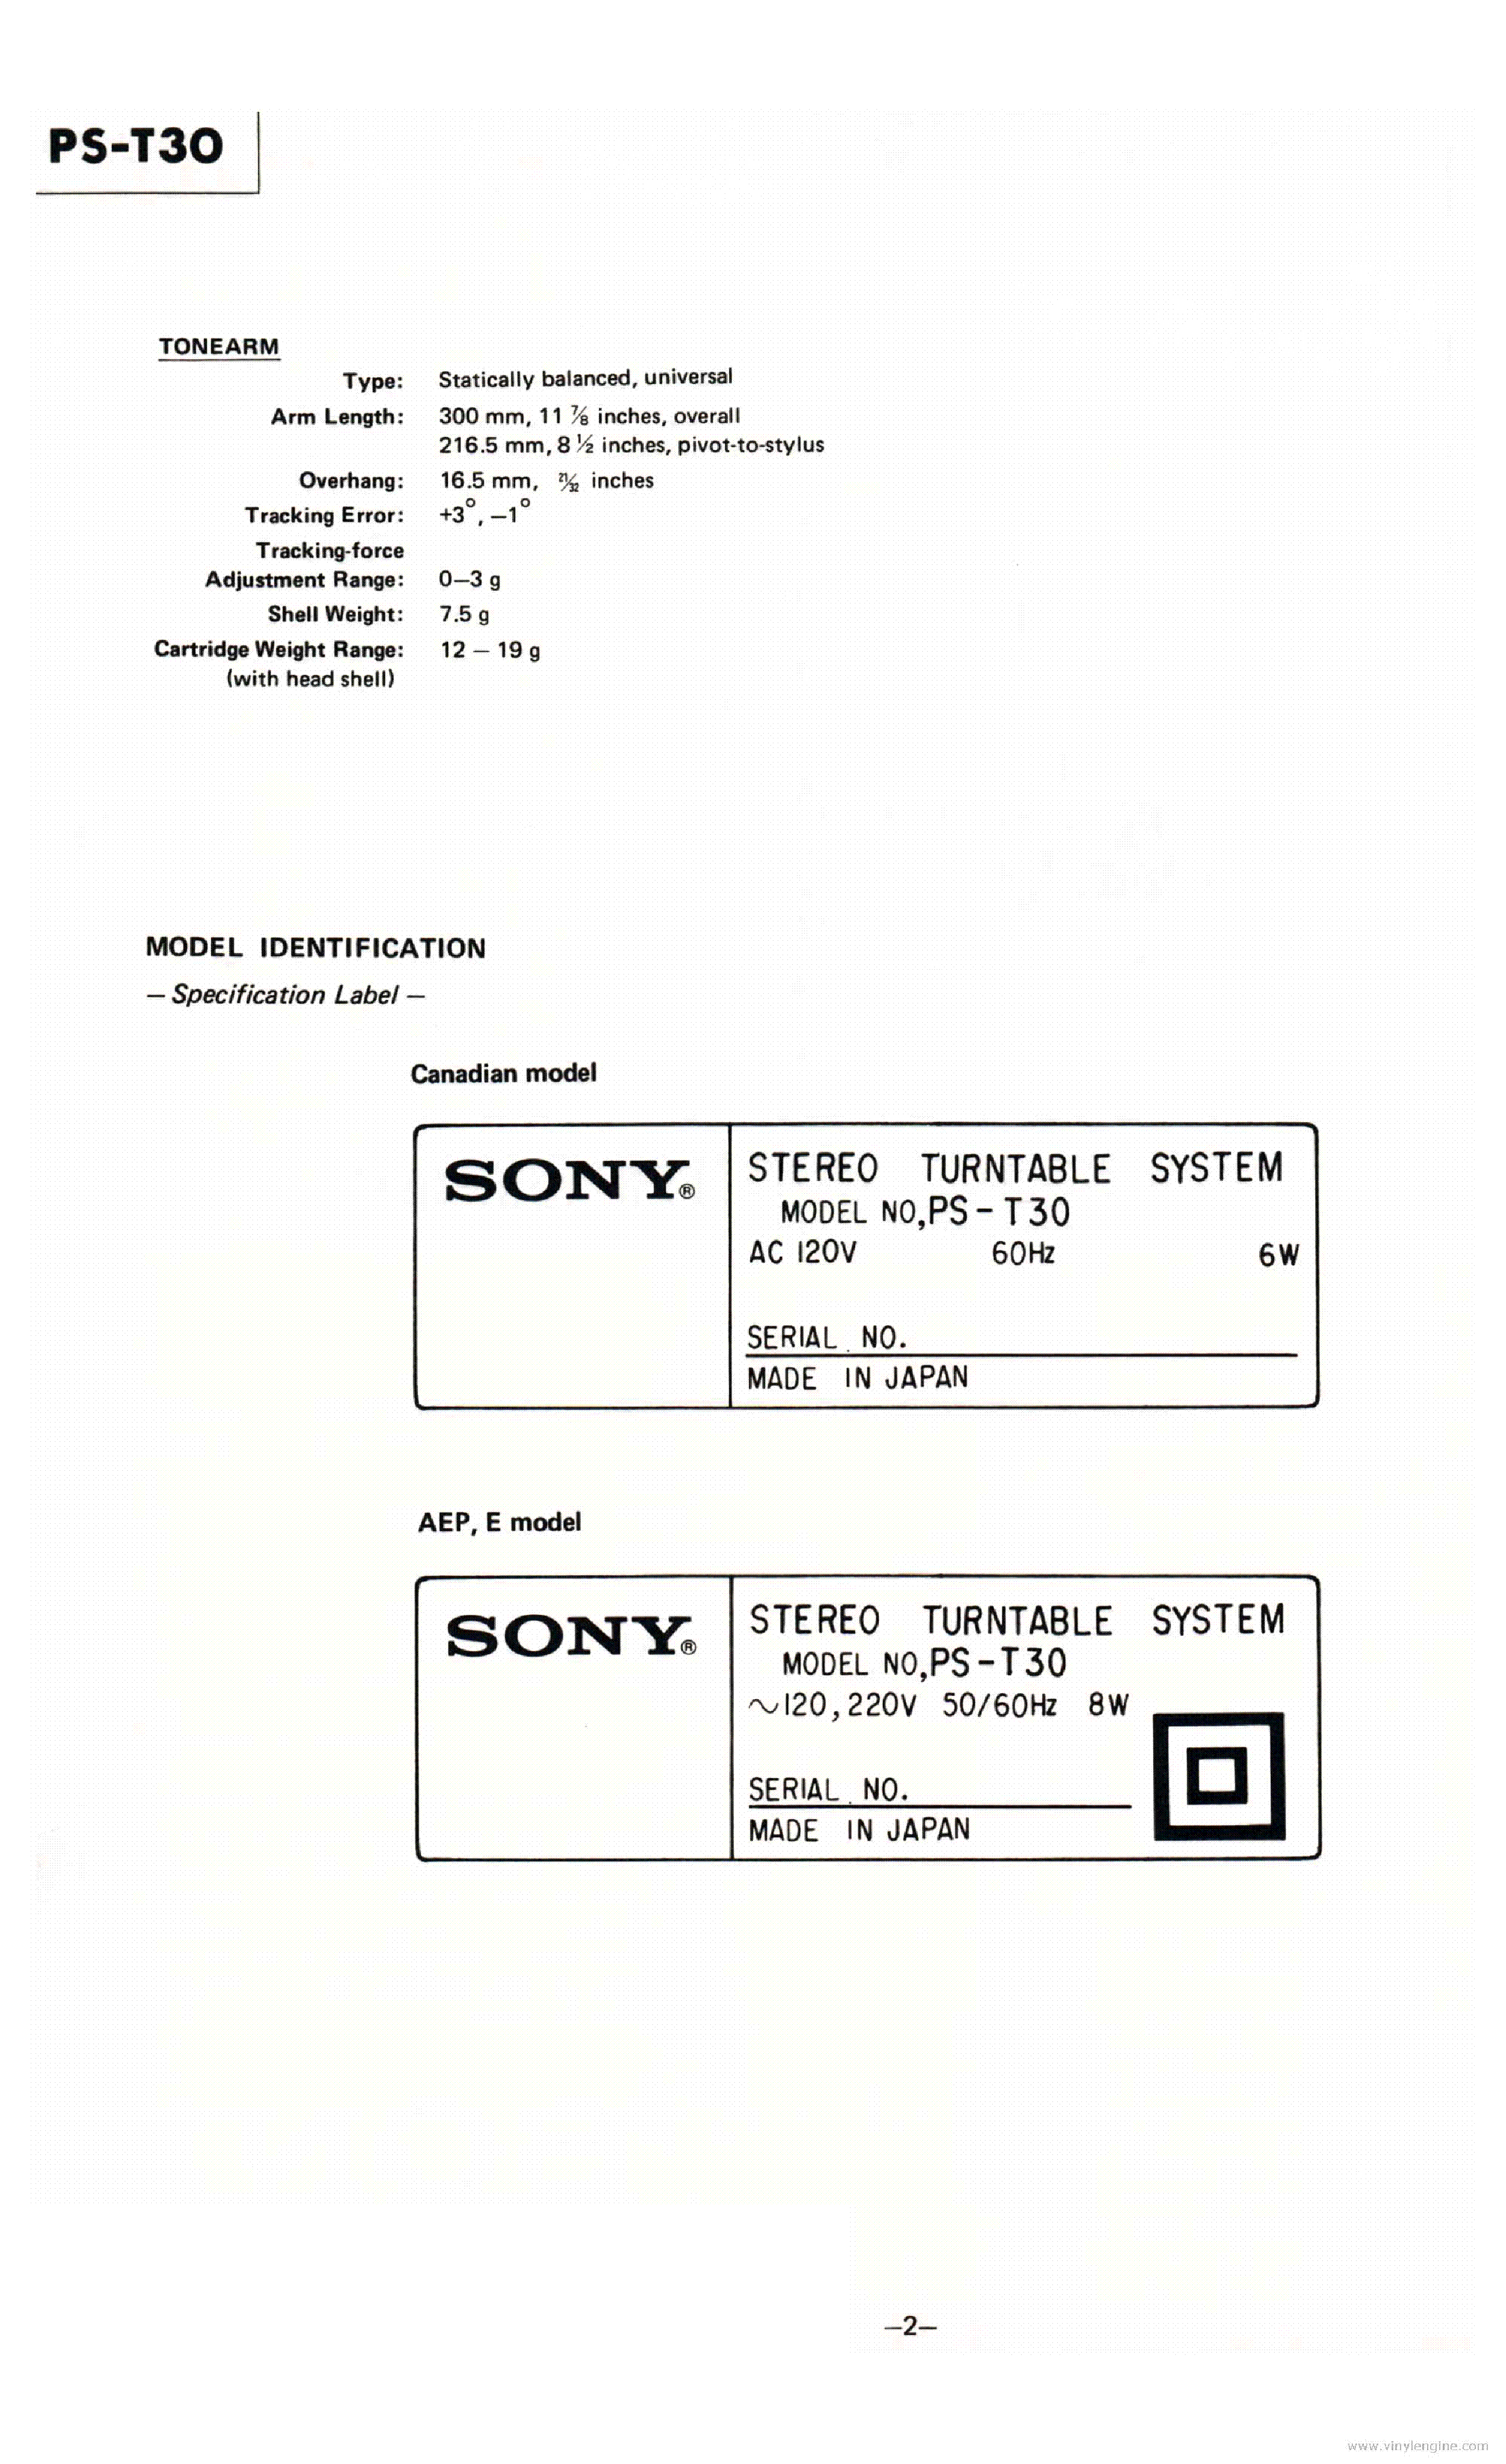 SONY PS-T30 service manual (2nd page)